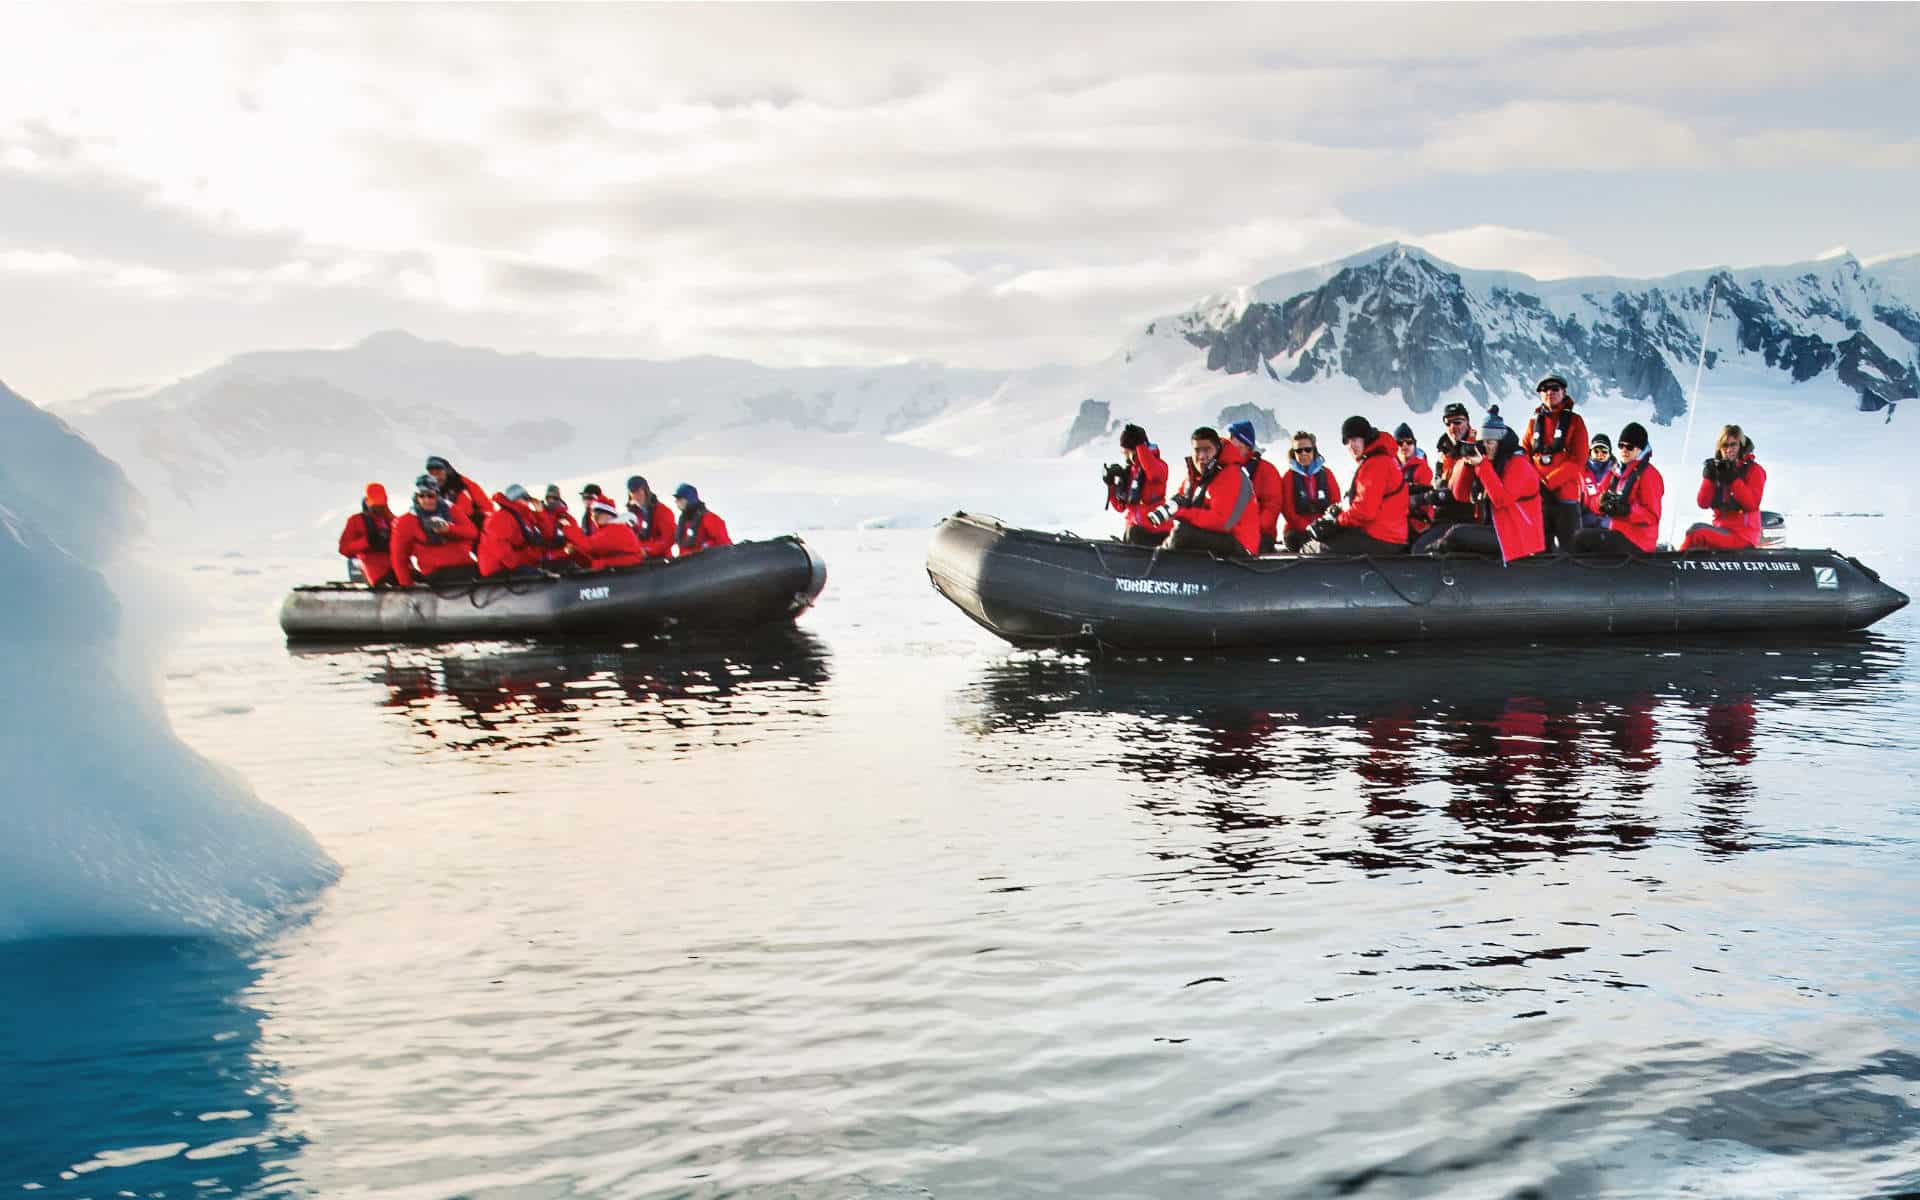 The Silversea Antarctic return is scheduled for November 2021.